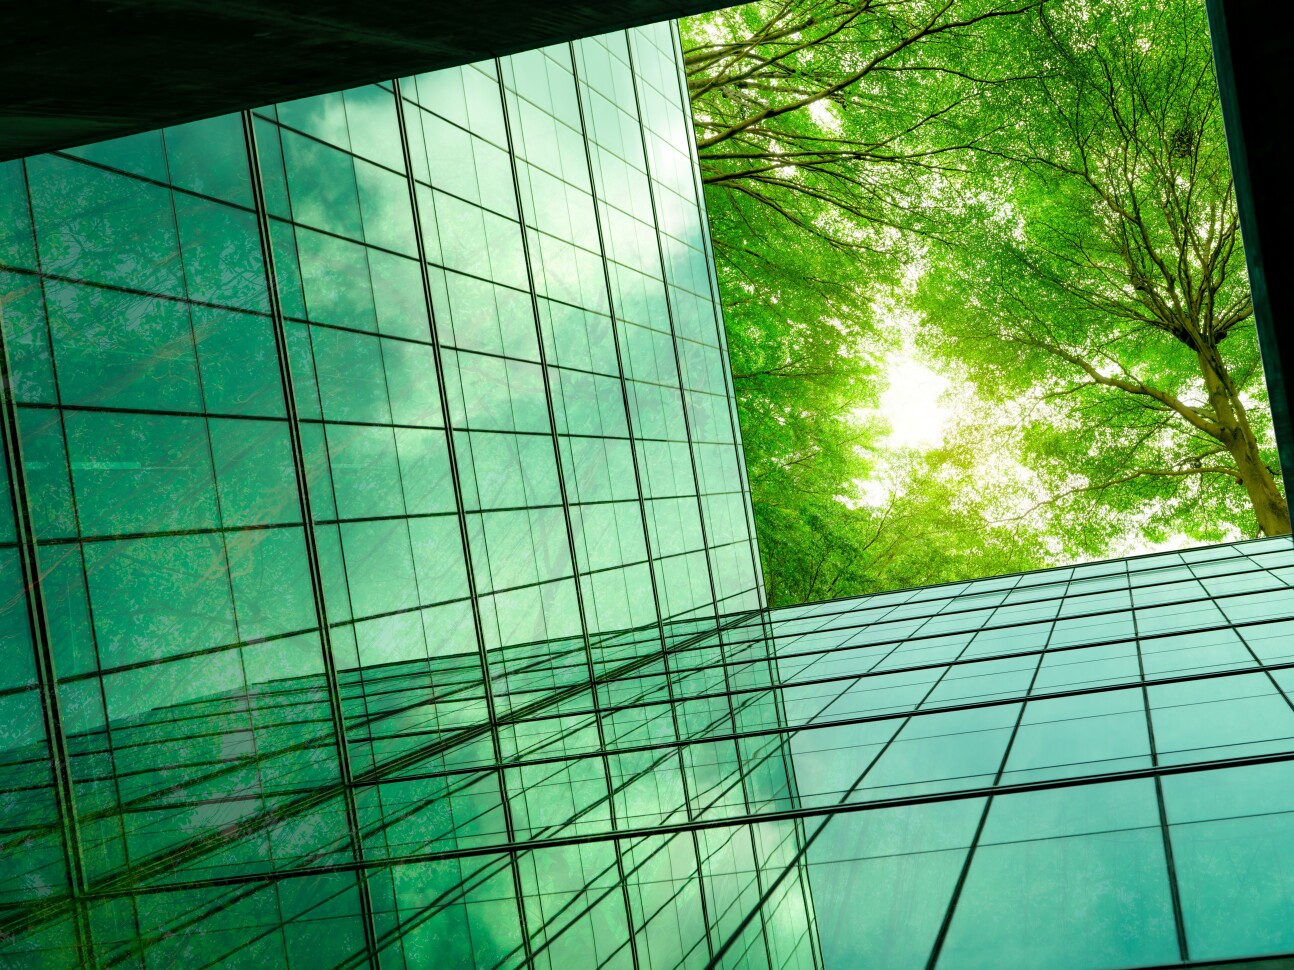 A green building, to reflect sustainability